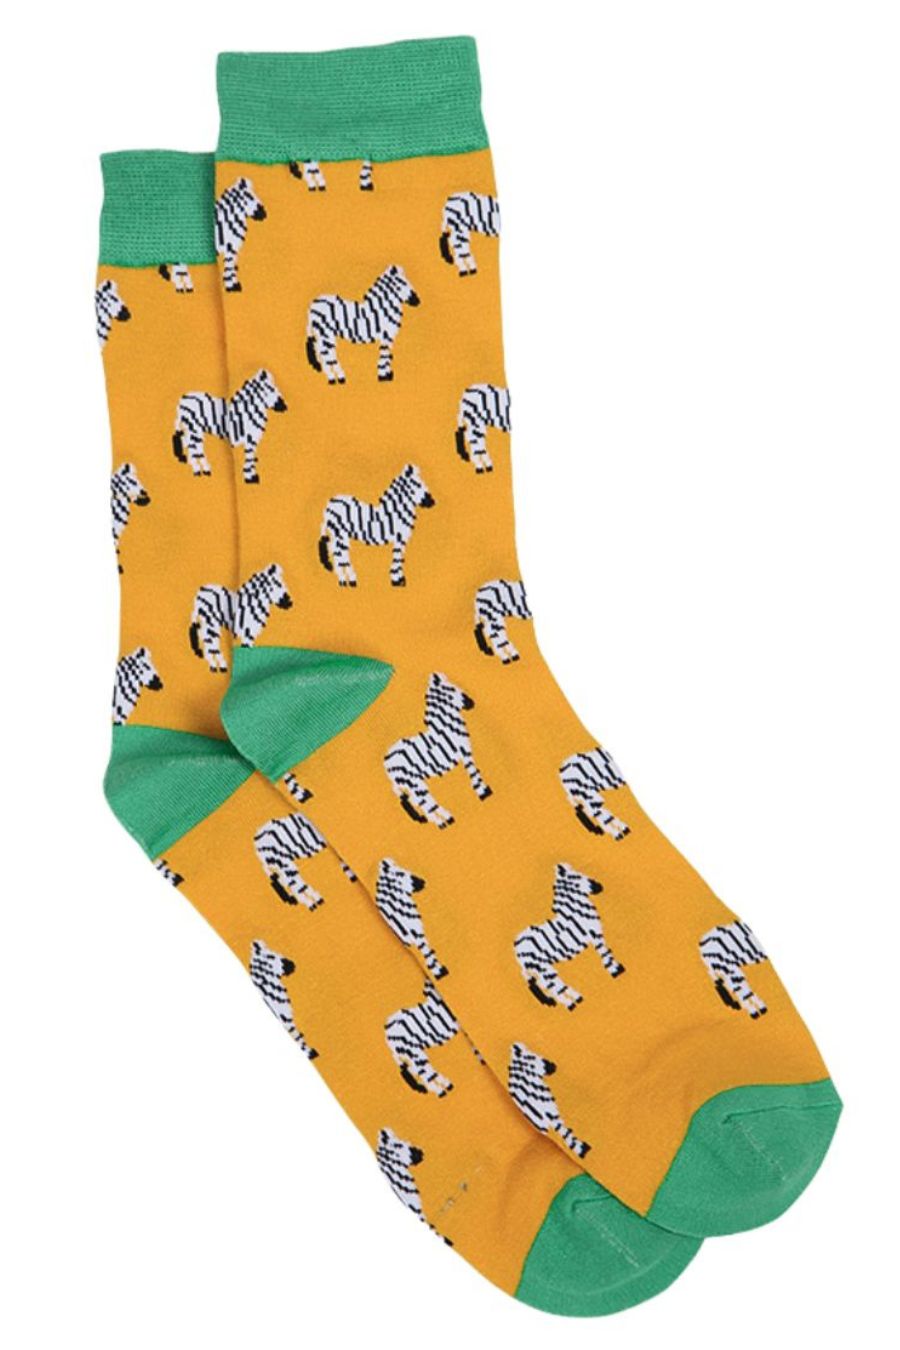 yellow, green dress socks with zebras all over them